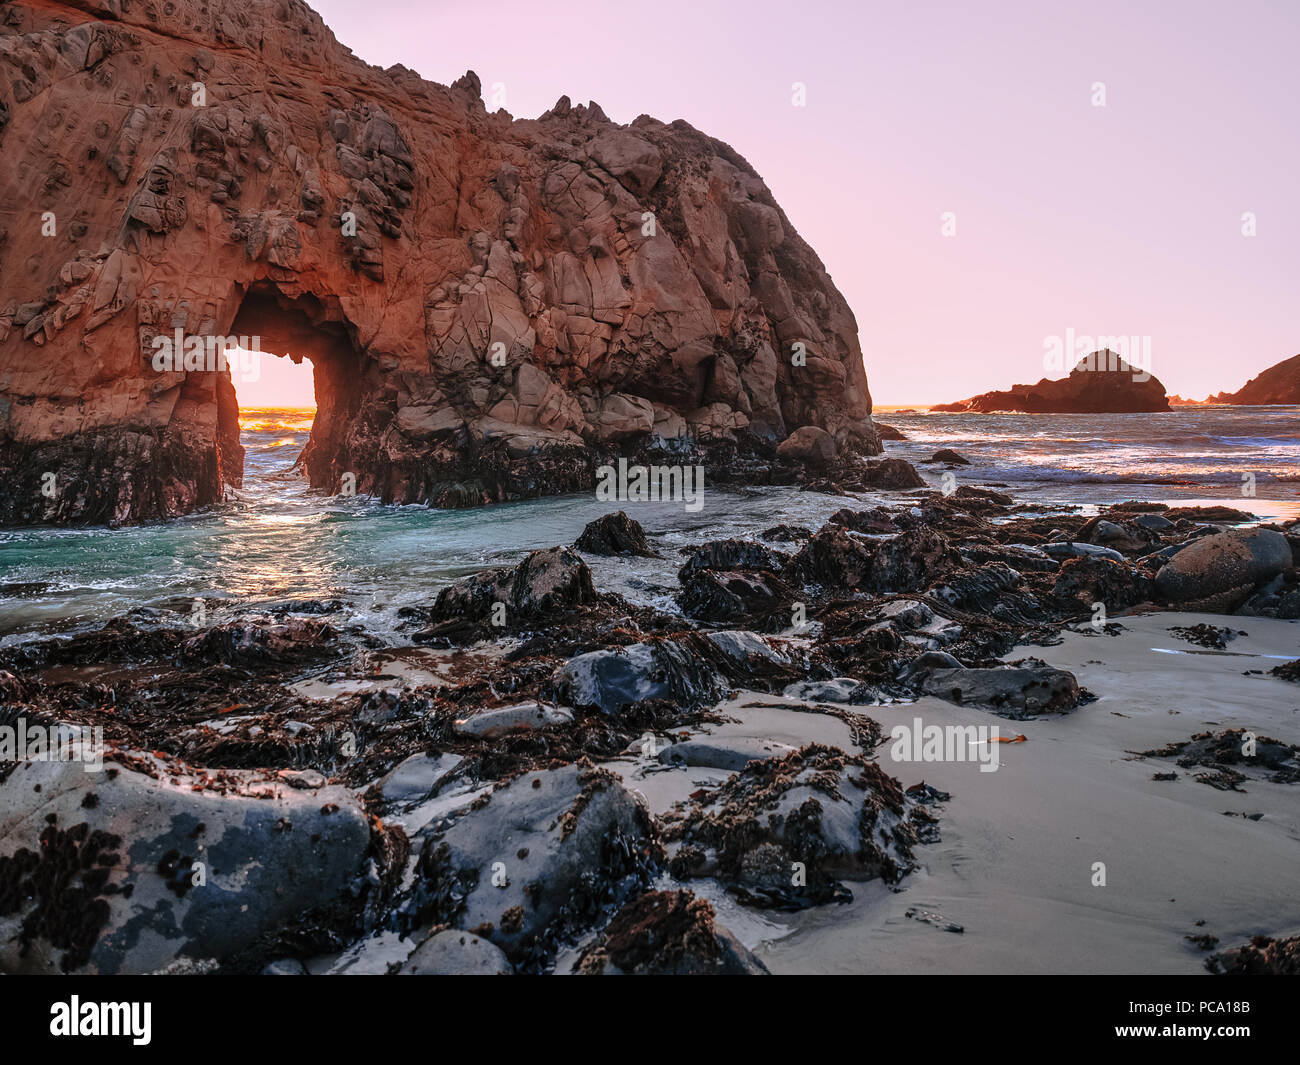 Panoramic view of the Keyhole Arch cliff at Pfeiffer Big Sur State Park beach in California. Black rocks in the foreground. Light of the setting sun. Stock Photo